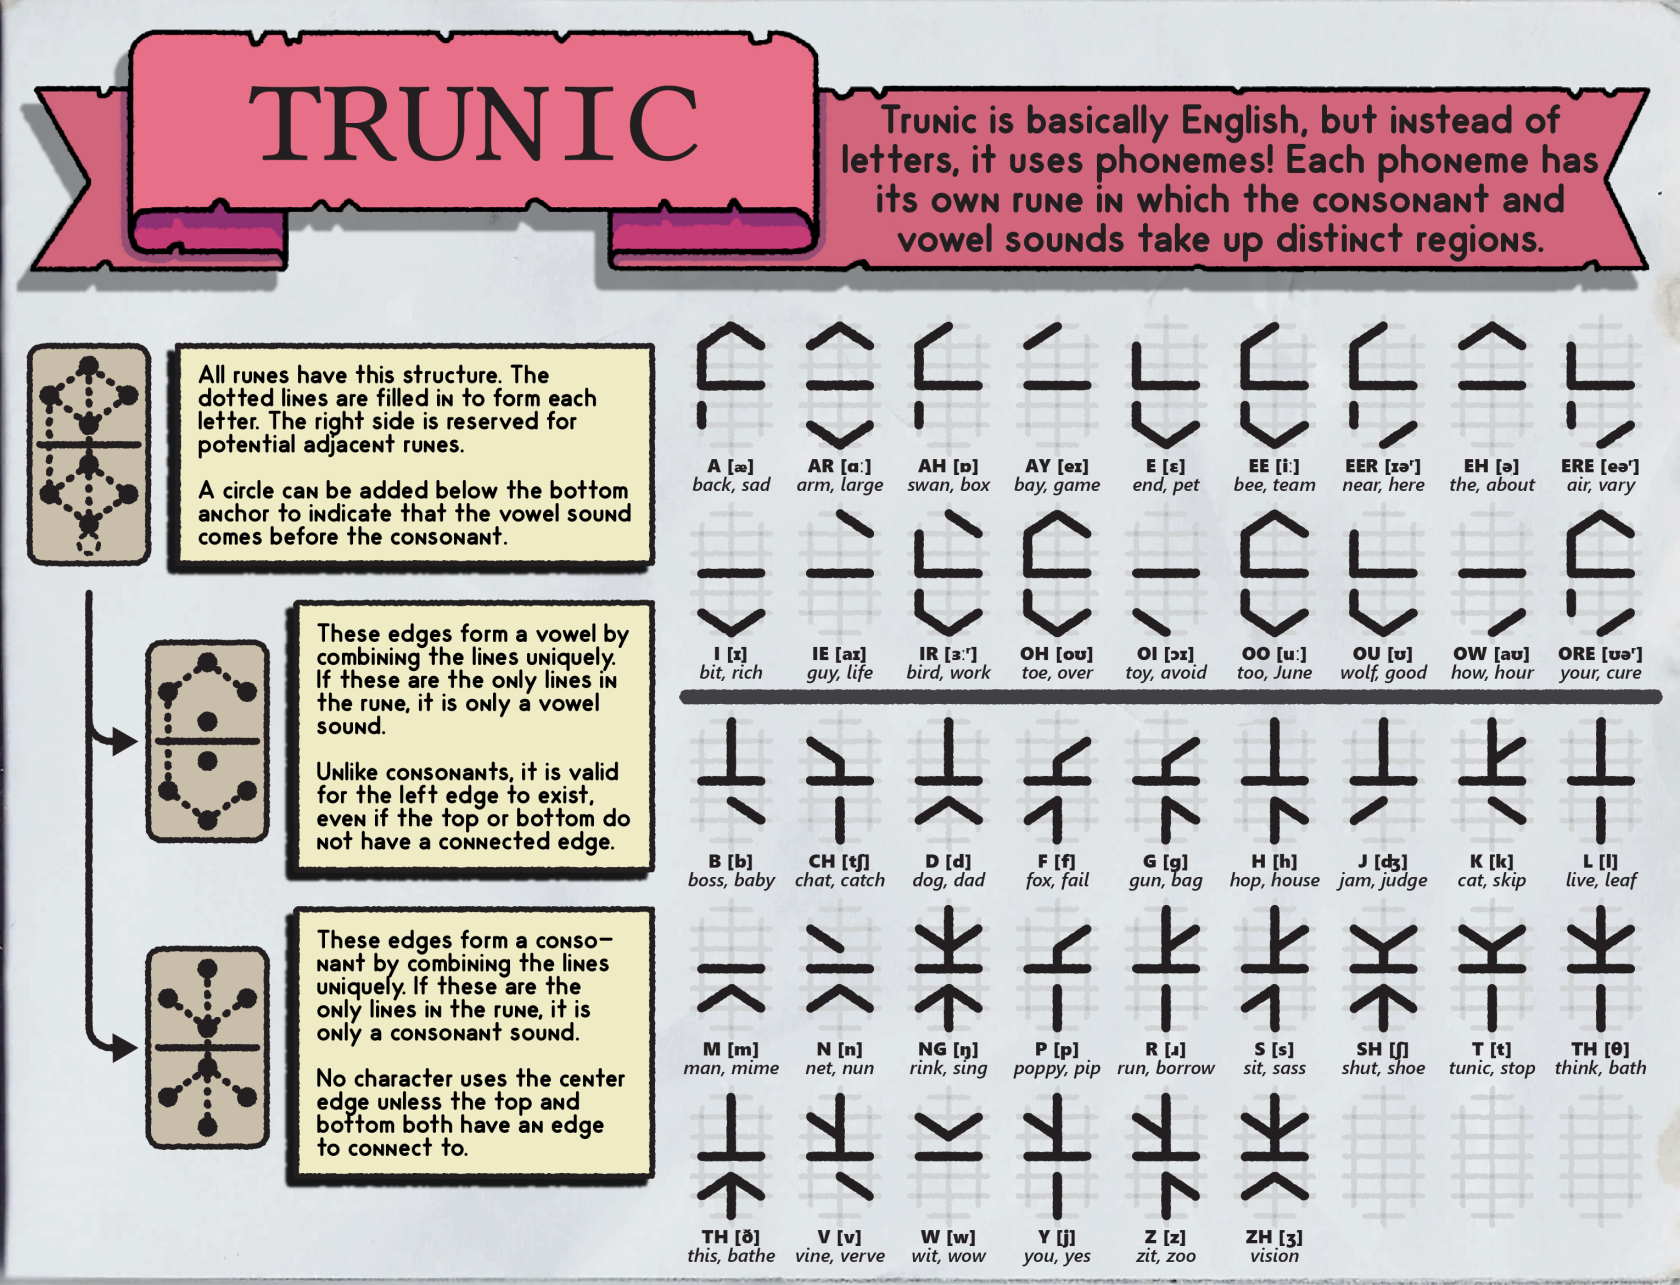 Trunic_New.png